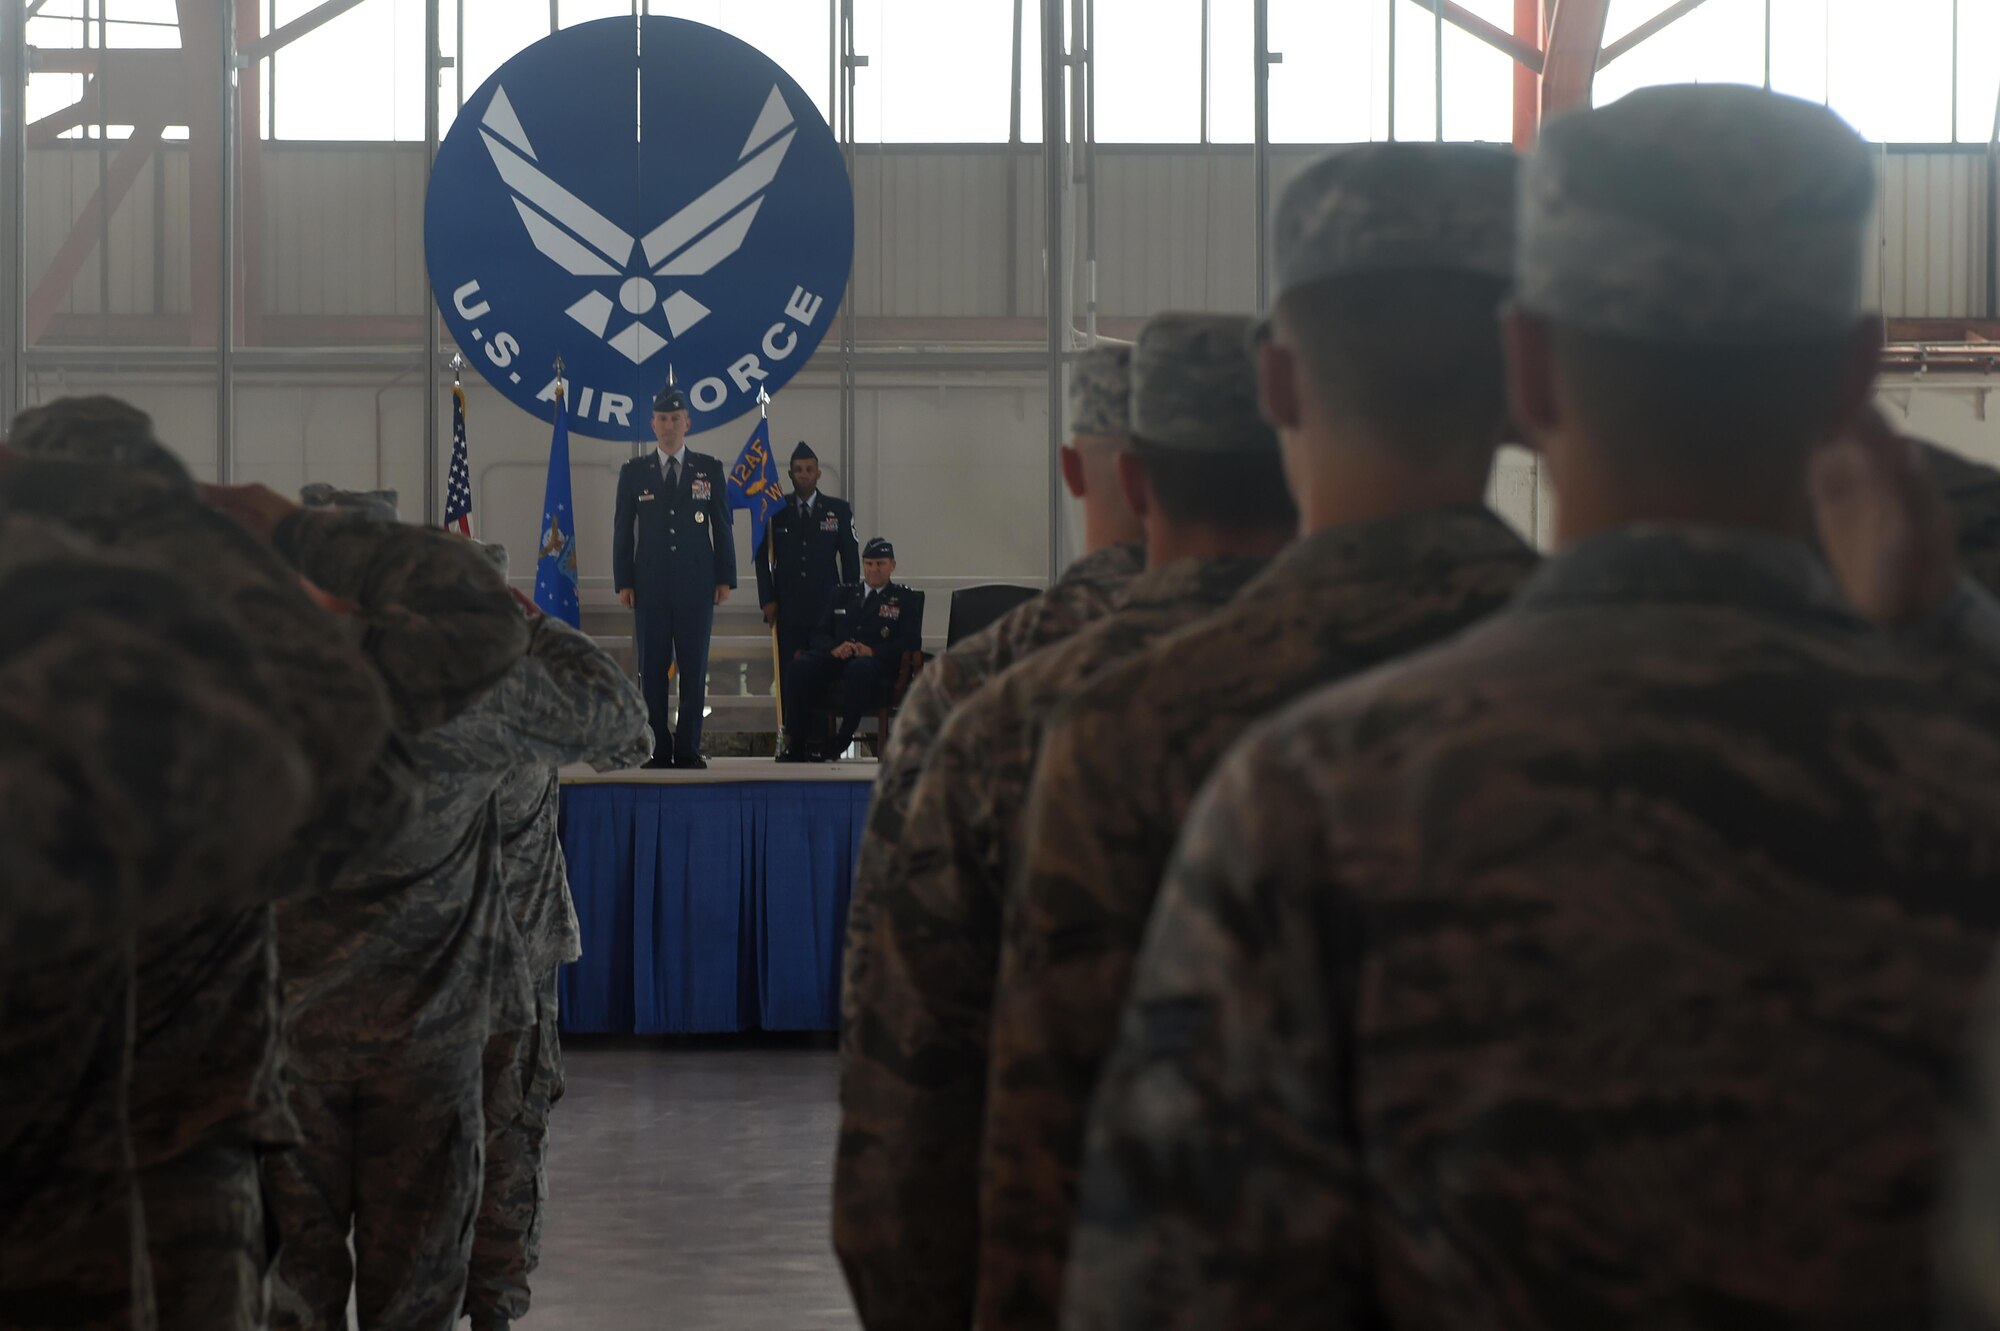 Col. Houston Cantwell, the 49th Wing commander, receives his first salute from members of the wing during a change of command ceremony at Holloman Air Force Base, N.M., on July 15. As commander of the 49th Wing, Cantwell is responsible for more than 17,000 military and civilian personnel. (Last names are being withheld due to operational requirements. U.S. Air Force photo by Staff Sgt. Eboni Prince)